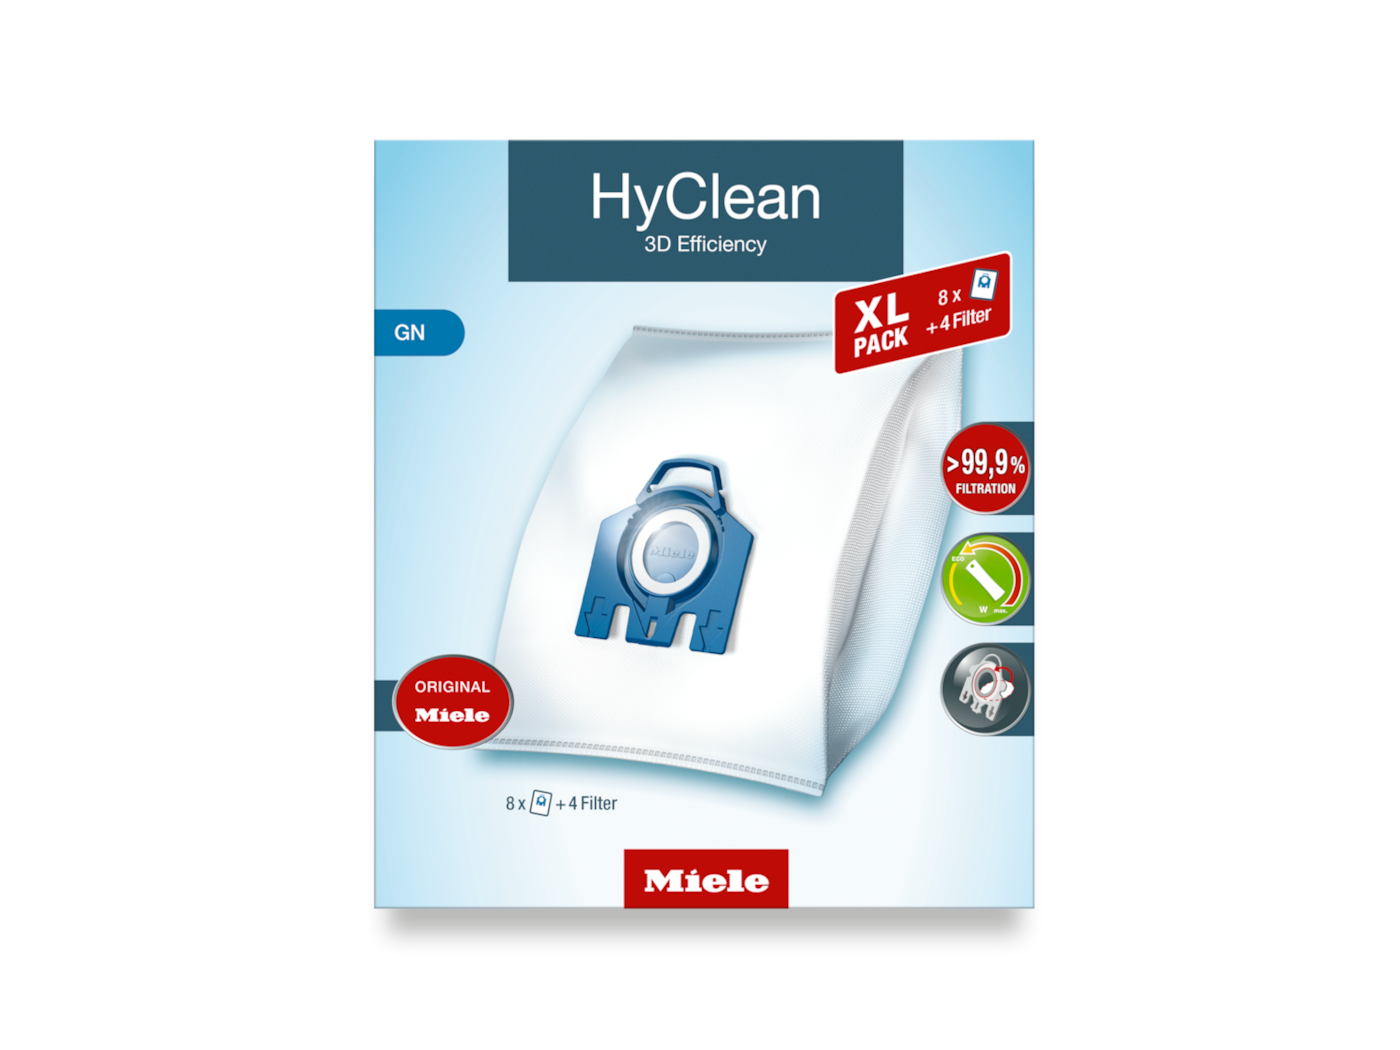 GN XL HyClean 3D product photo